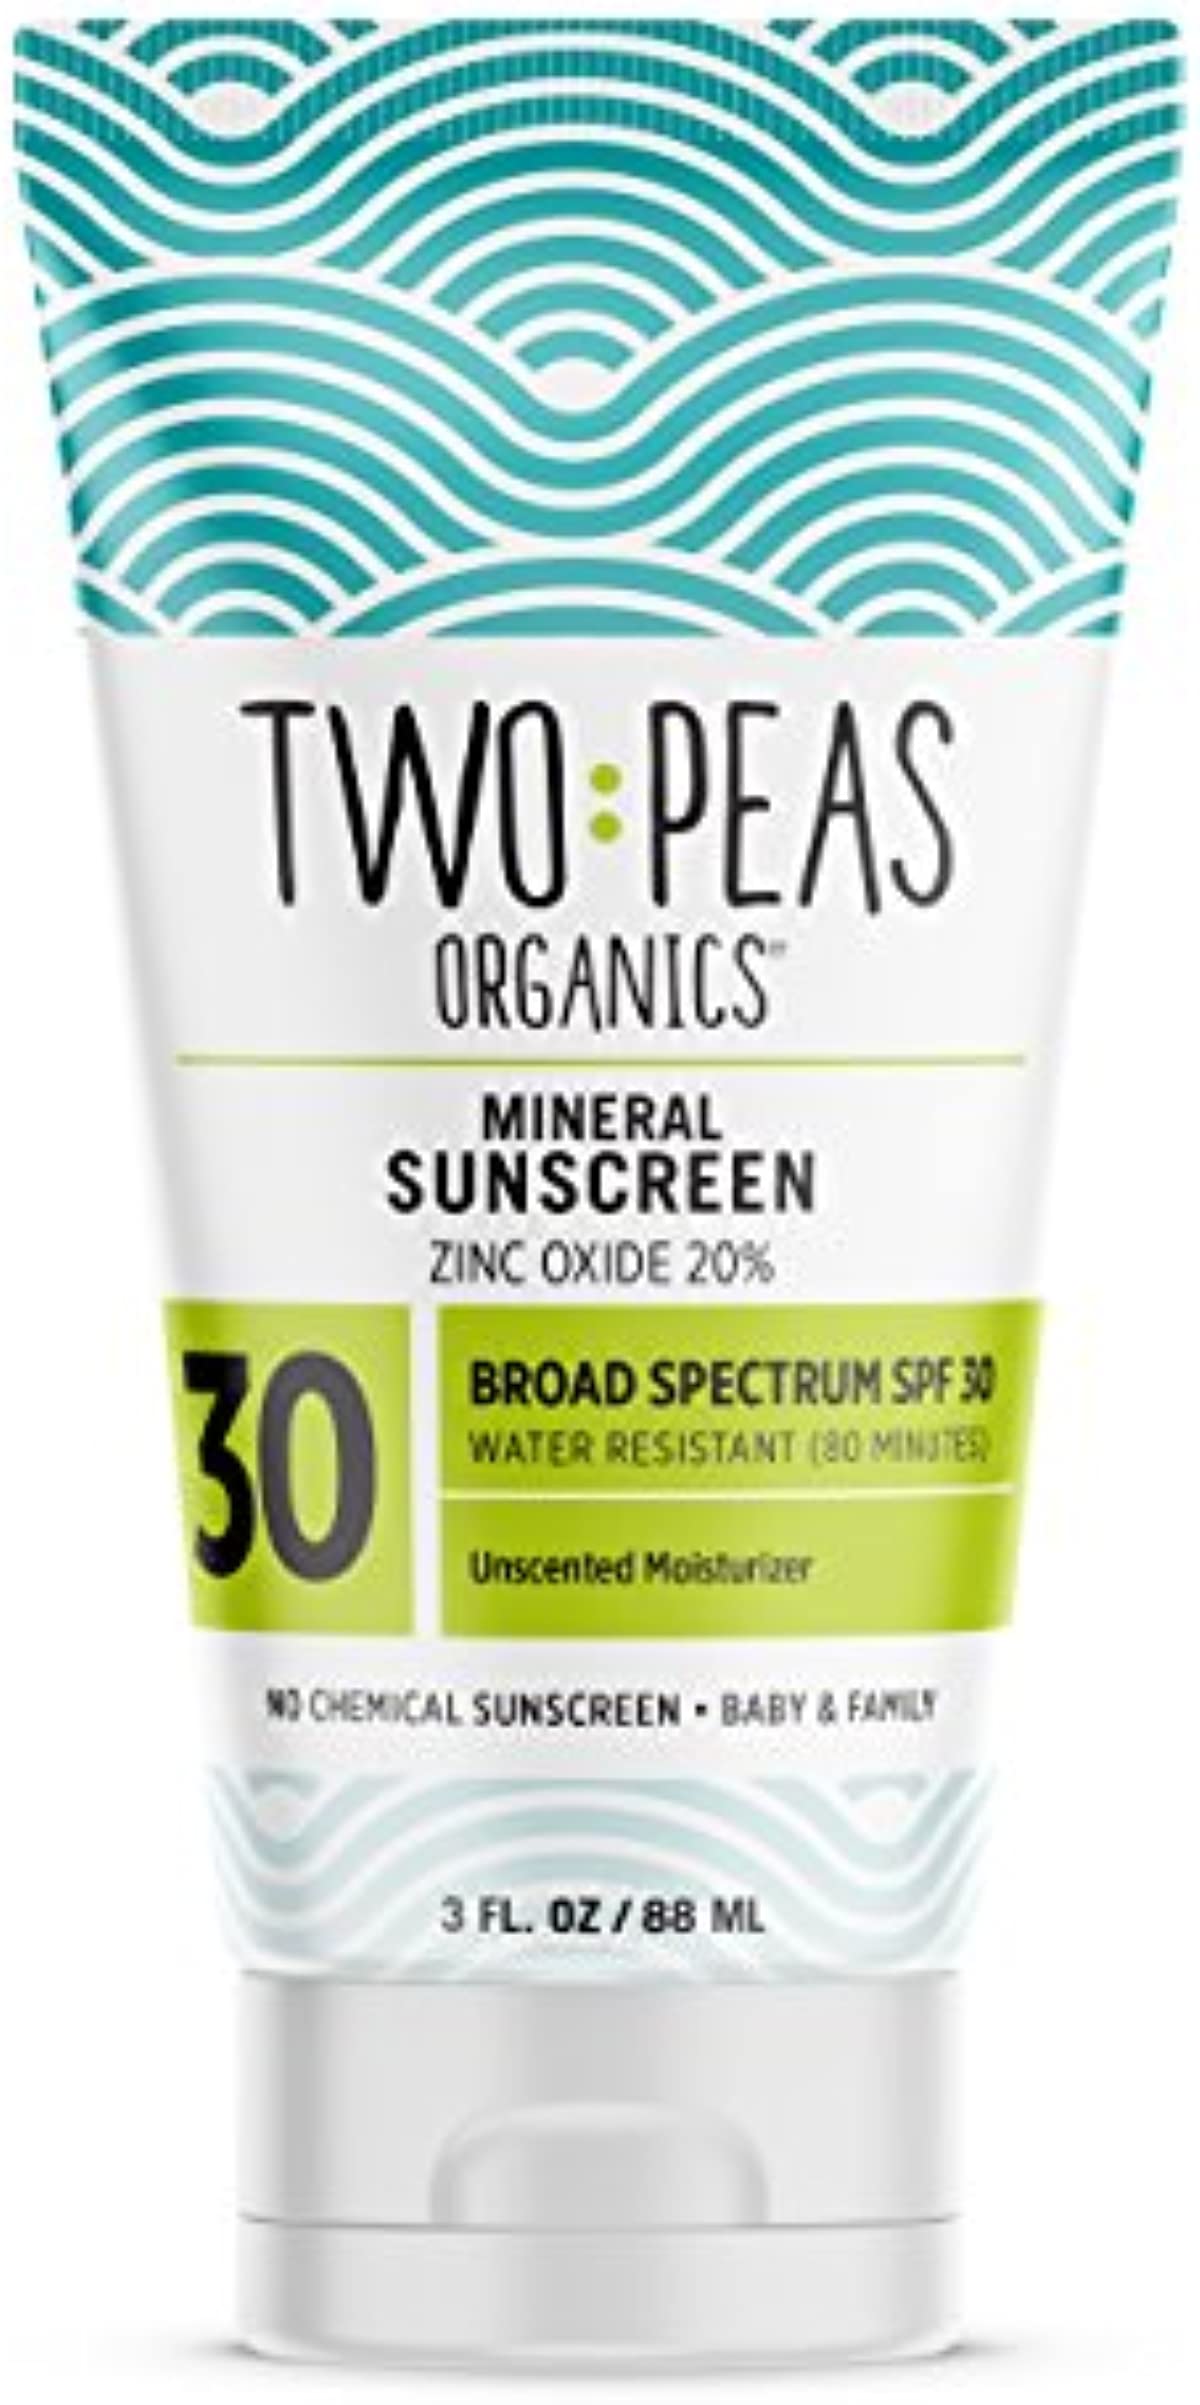 Two Peas Organics - All Natural Organic Sunscreen Lotion - Coral Reef Safe - Baby, Kid & Family Friendly - Chemical Free Mineral Based Formula - Waterproof & Unscented - SPF 30 - 3oz